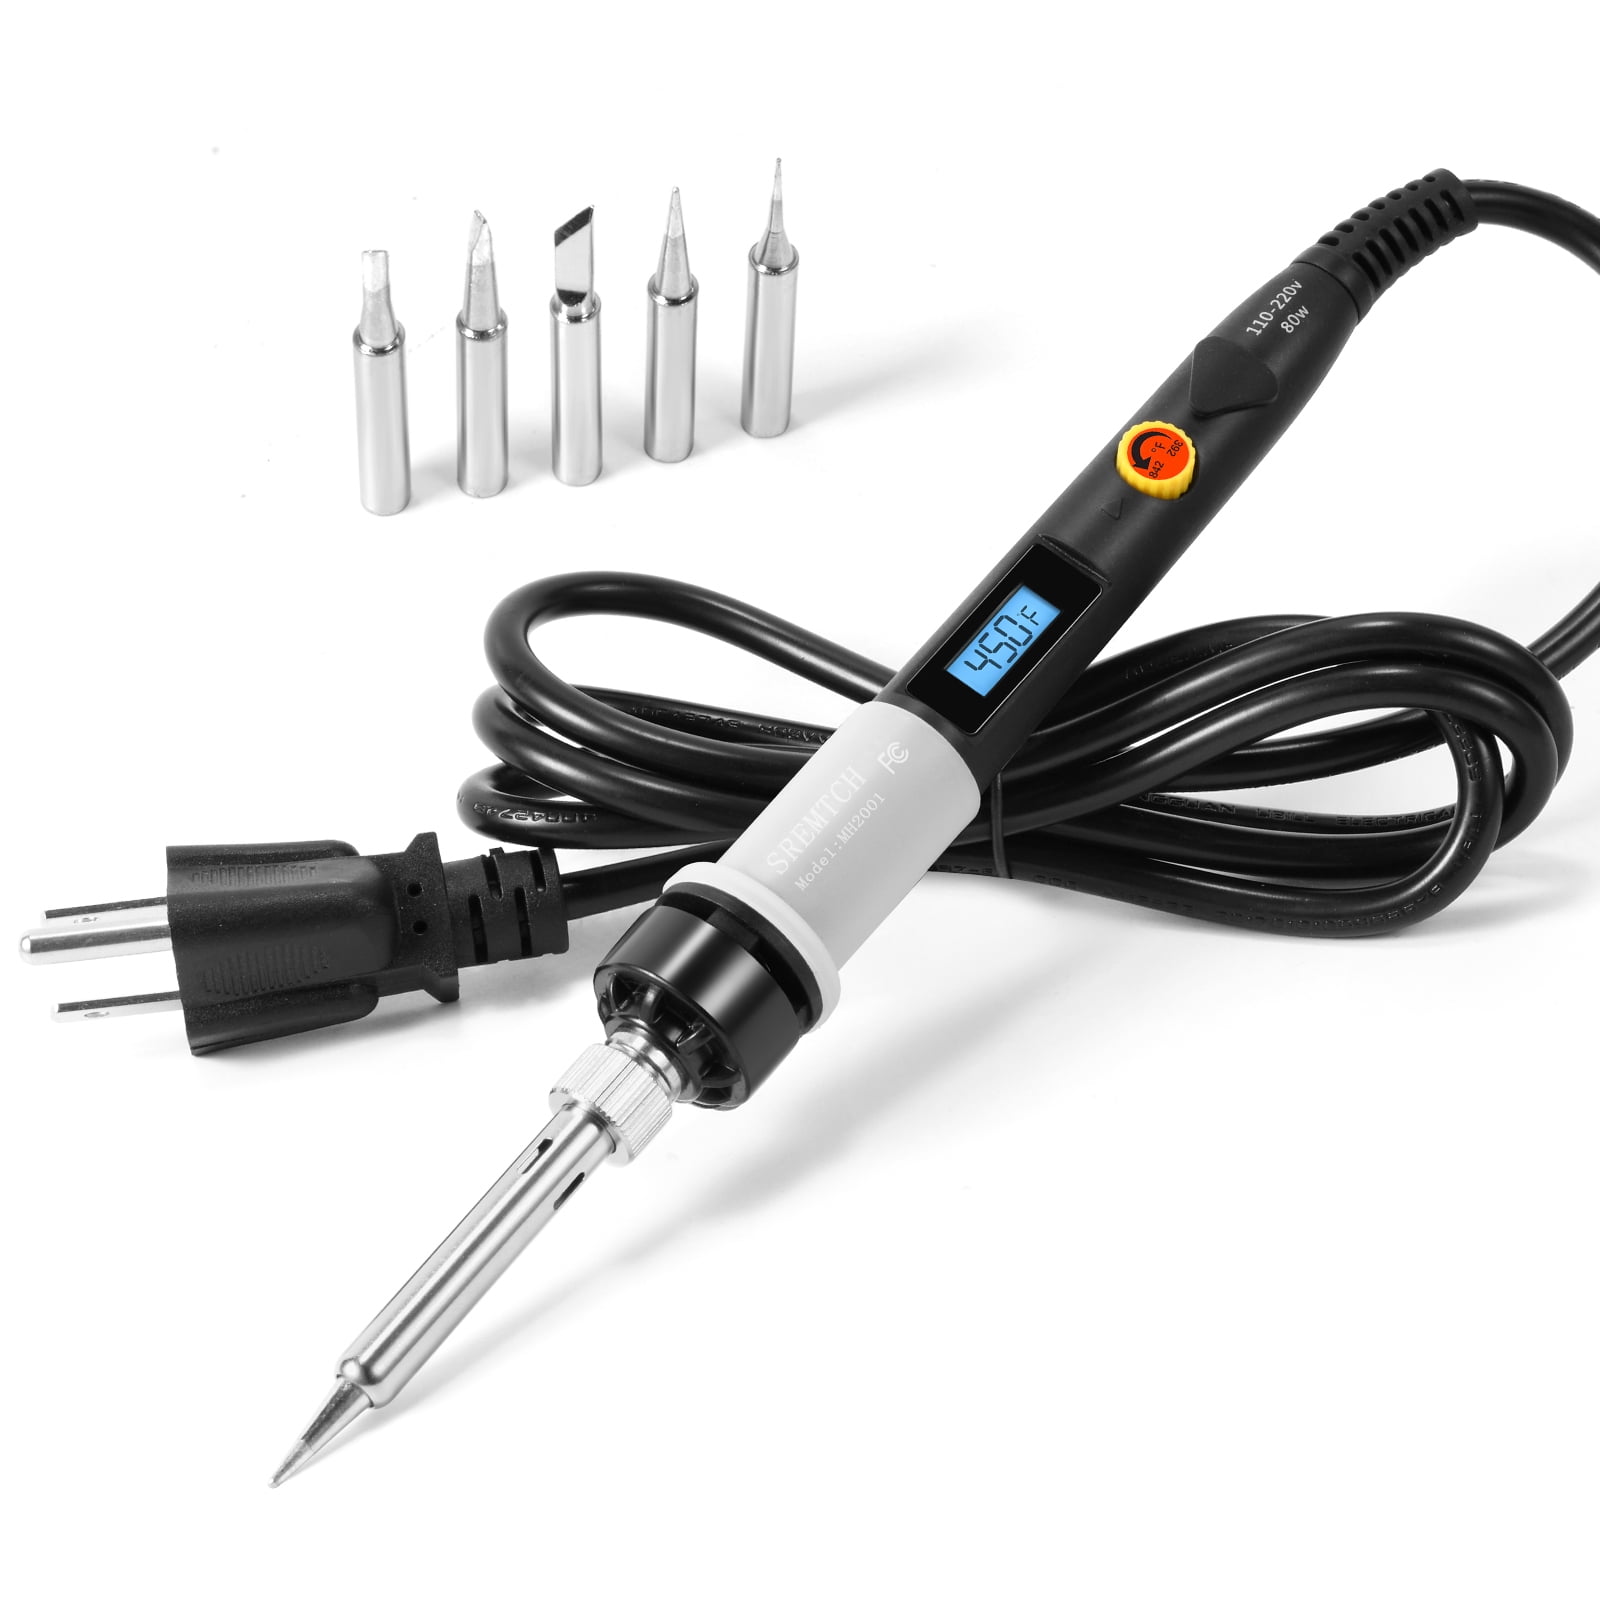 INDUSTRY QUALITY 60W SOLDERING IRON Electrical 230V Tool Circuitry Repair DIY